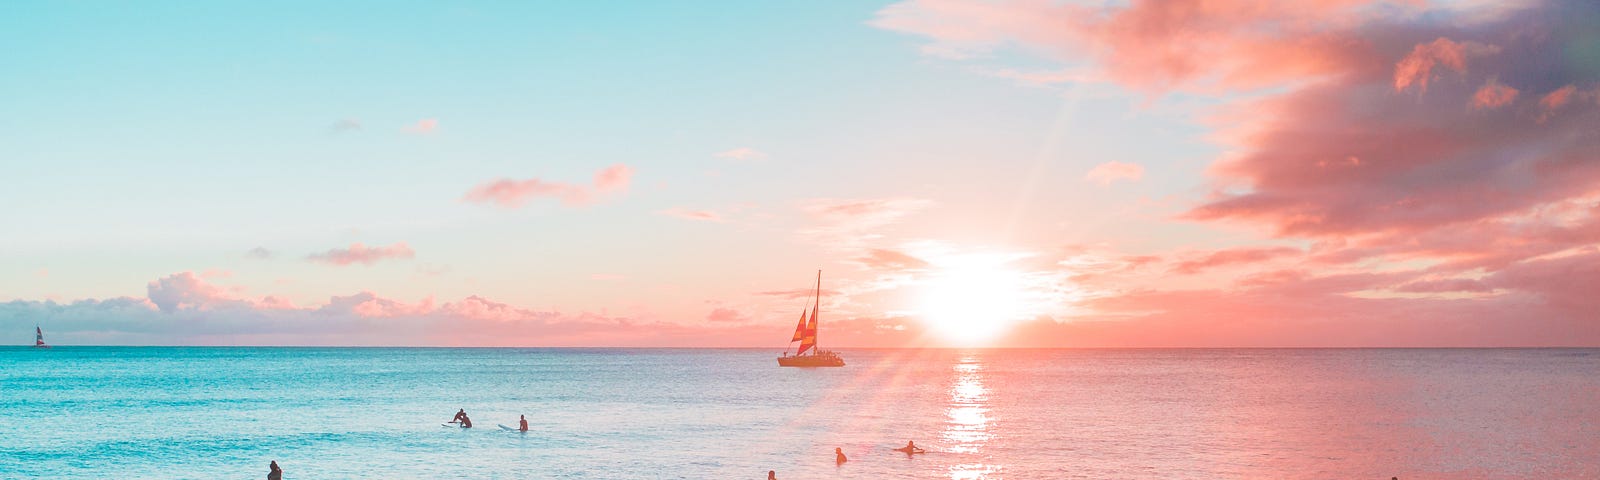 Sunset over a Hawaiian beach with surfers, paddle surfers and a boat.